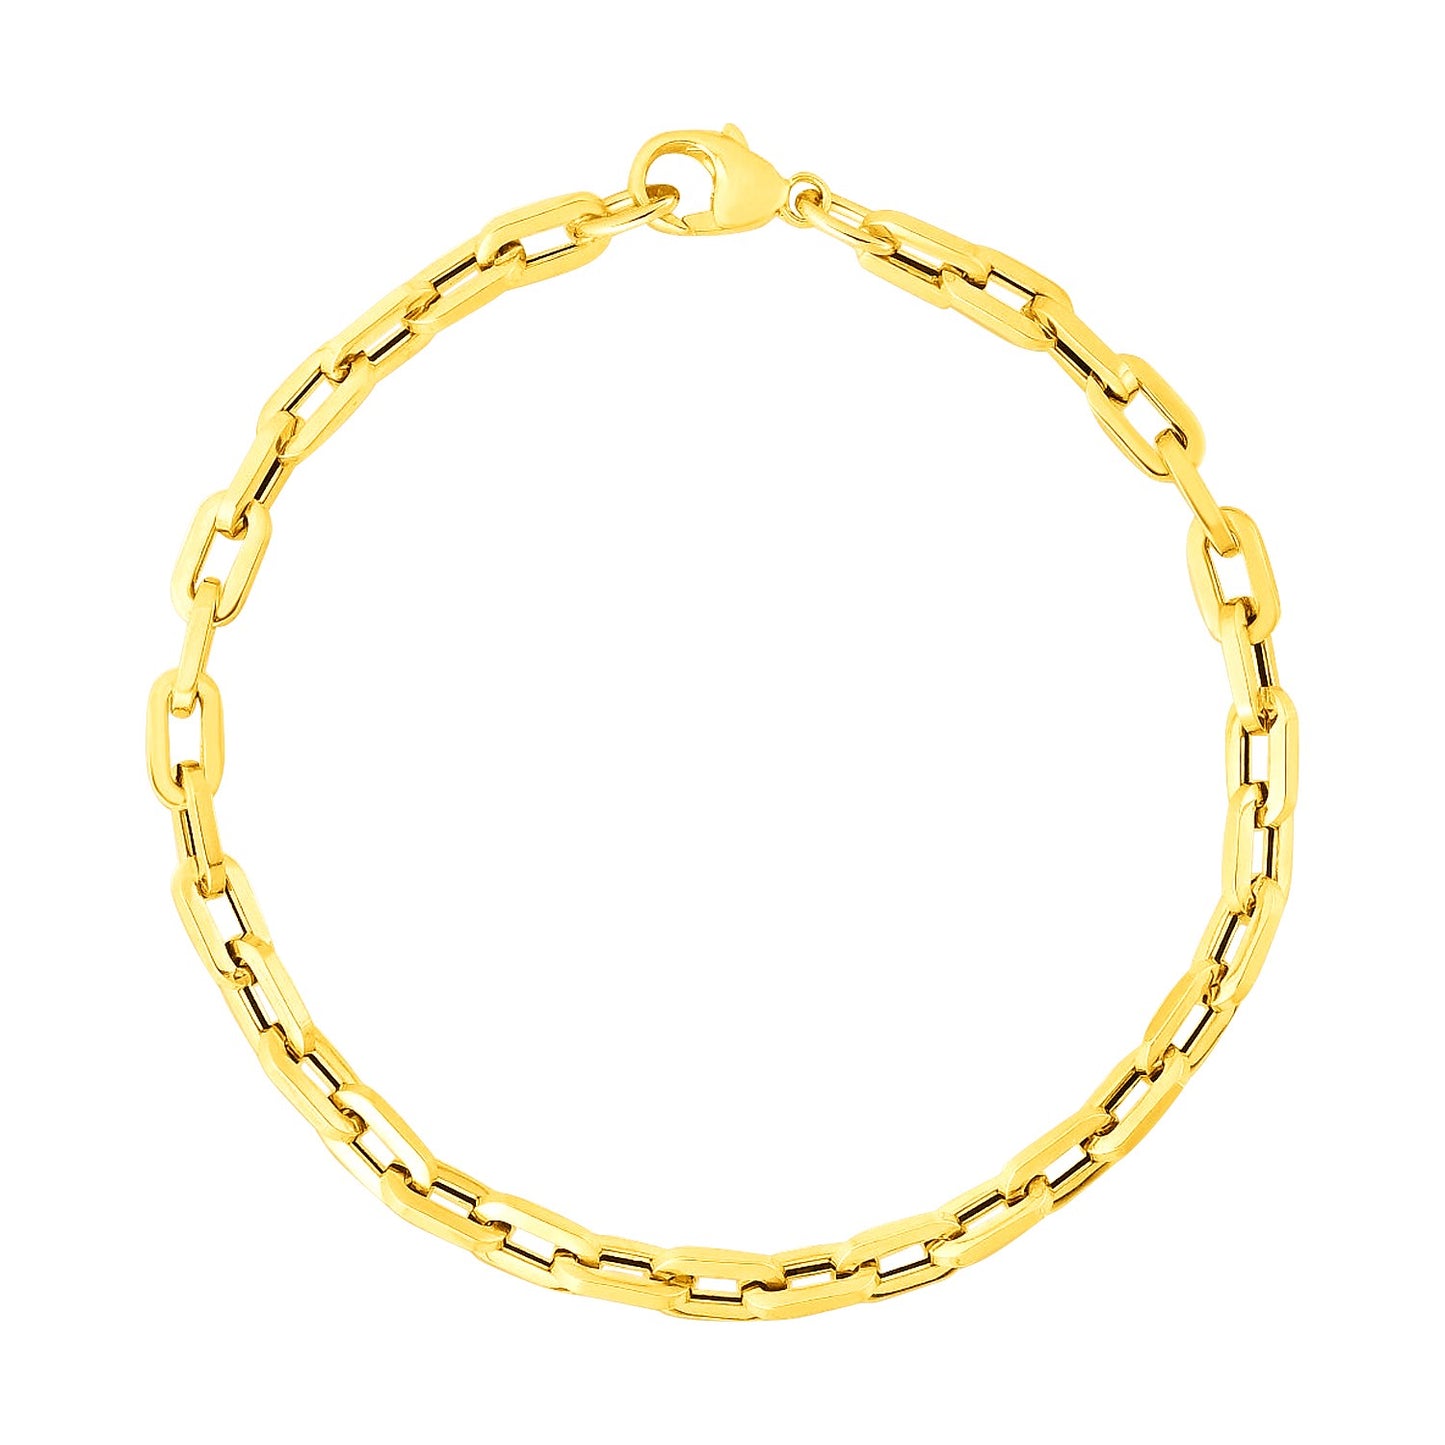 14k Yellow Gold 7 1/2 inch Paperclip Chain Bracelet with Three Diamond Links (4.20 mm)